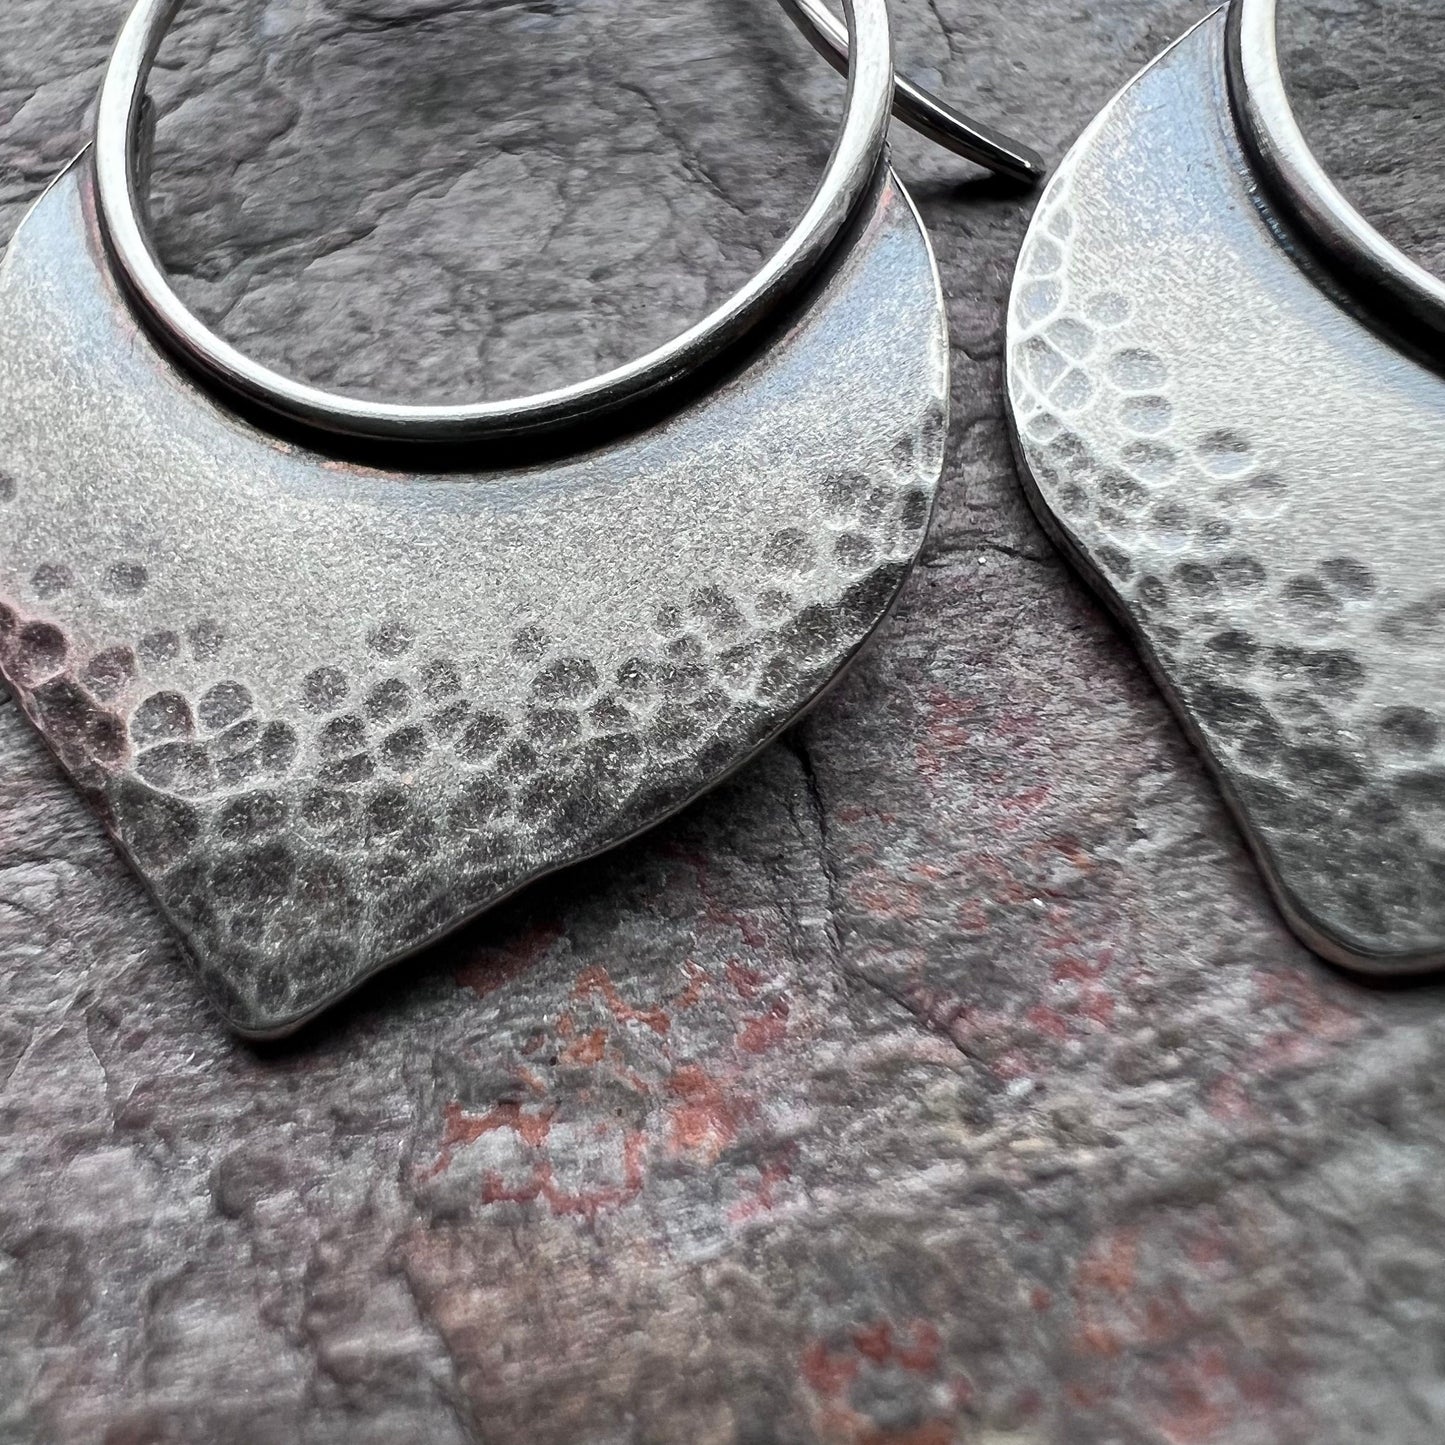 Sterling Silver Hammered Lotus Petal Earrings - Available in 3 Sizes